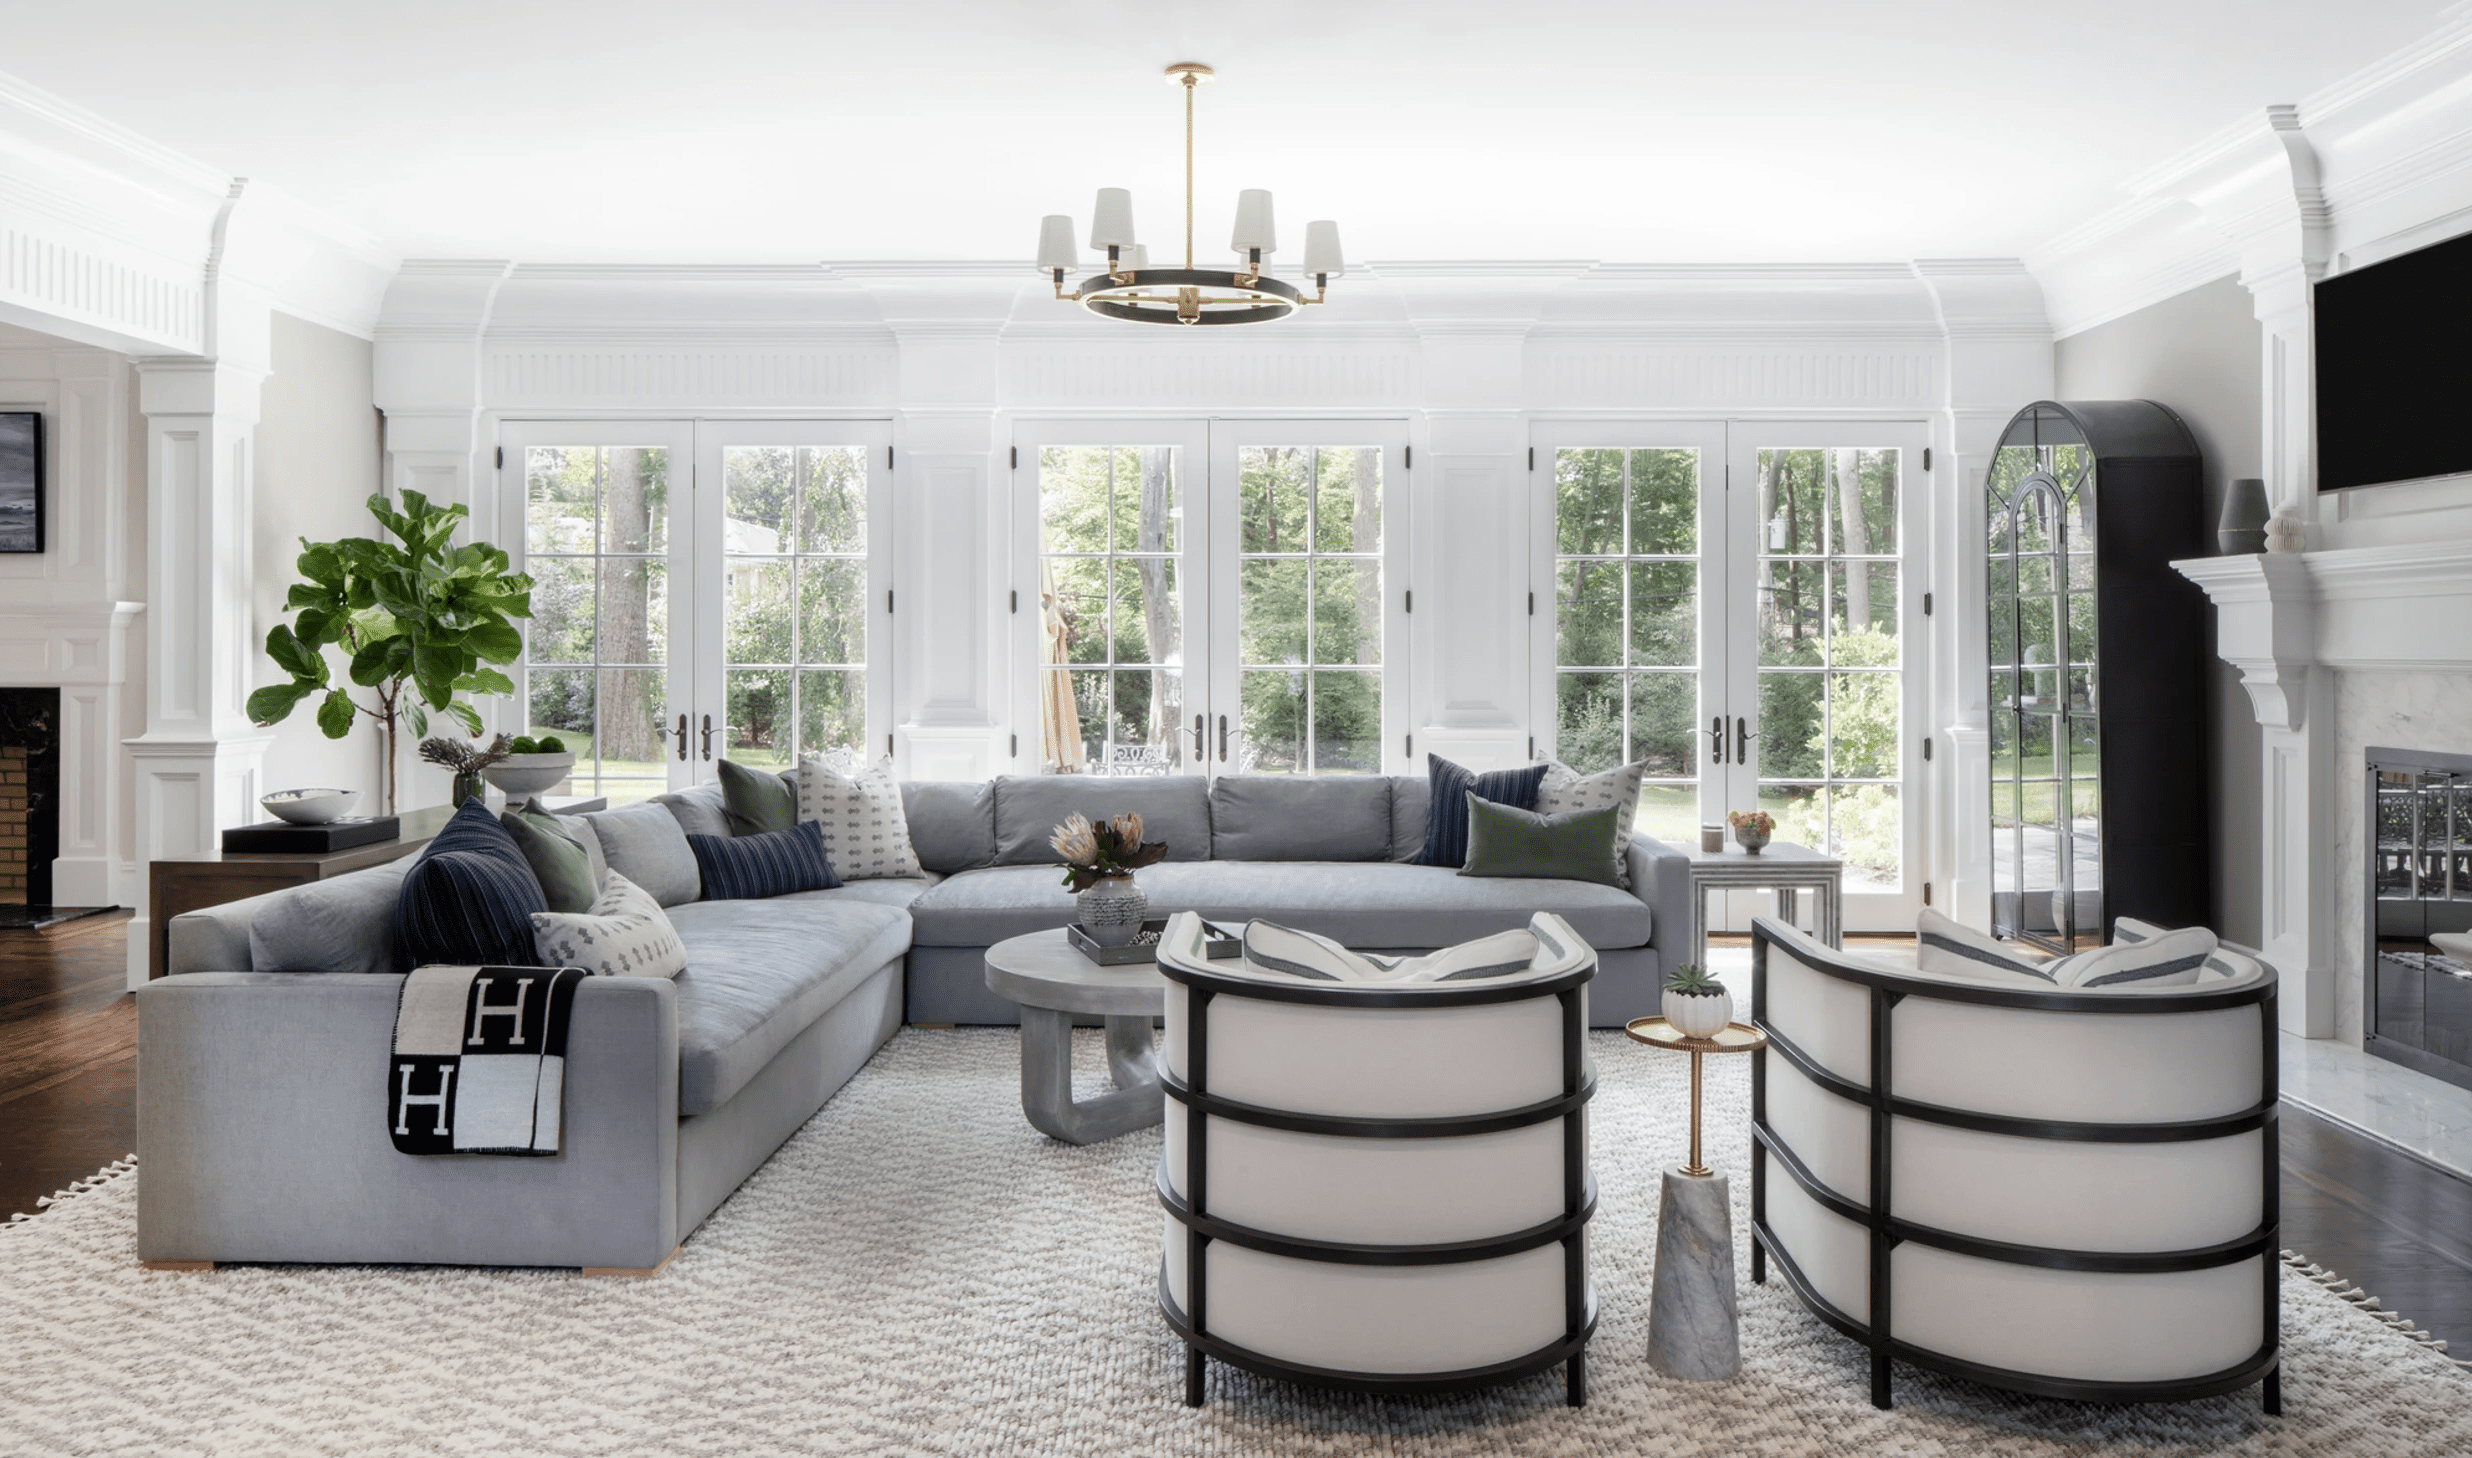 7 Ways To Style A Gray Sofa And Complement Its Color Intended For Sofas In Dark Gray (View 10 of 15)